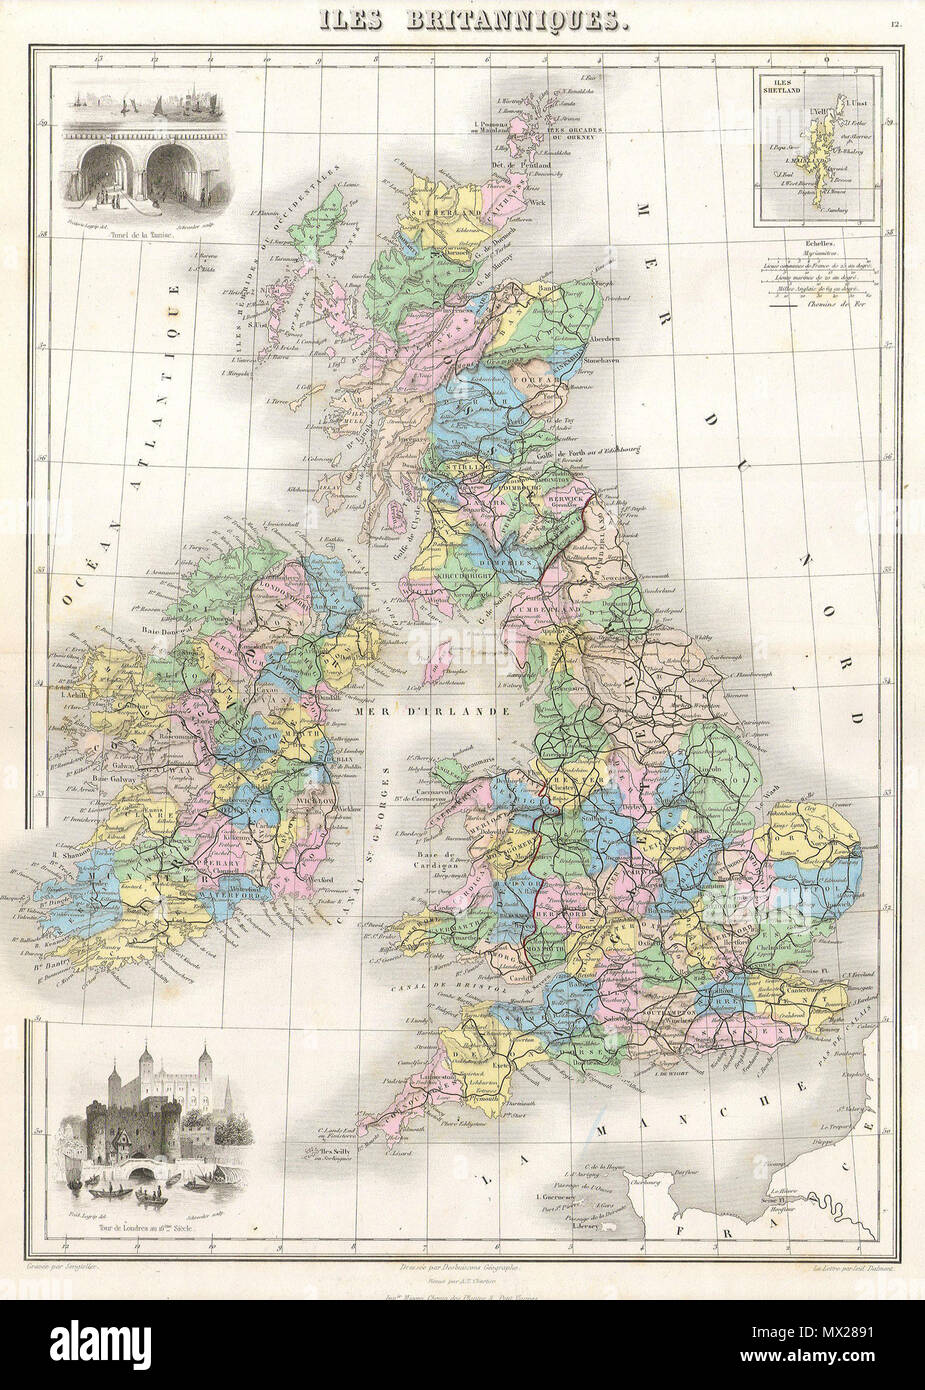 . Iles Britanniques.  English: This hand colored map of the British Isles is a steel plate engraving, dating to 1878 by the well regarded French cartographer Migeon. It includes England, Scotland, Ireland and Wales. Migeon’s Geographie Universelle, published in Paris, is one of the last fine atlases produced in the 19th century. It contains many stylistic elements of early 19th century cartography such as full hand coloring, numerous decorative vignettes, and high quality low acid paper. . 1878 10 1878 Migeon Map of the British Isles ( England, Ireland, Scotland ) - Geographicus - BritishIsles Stock Photo